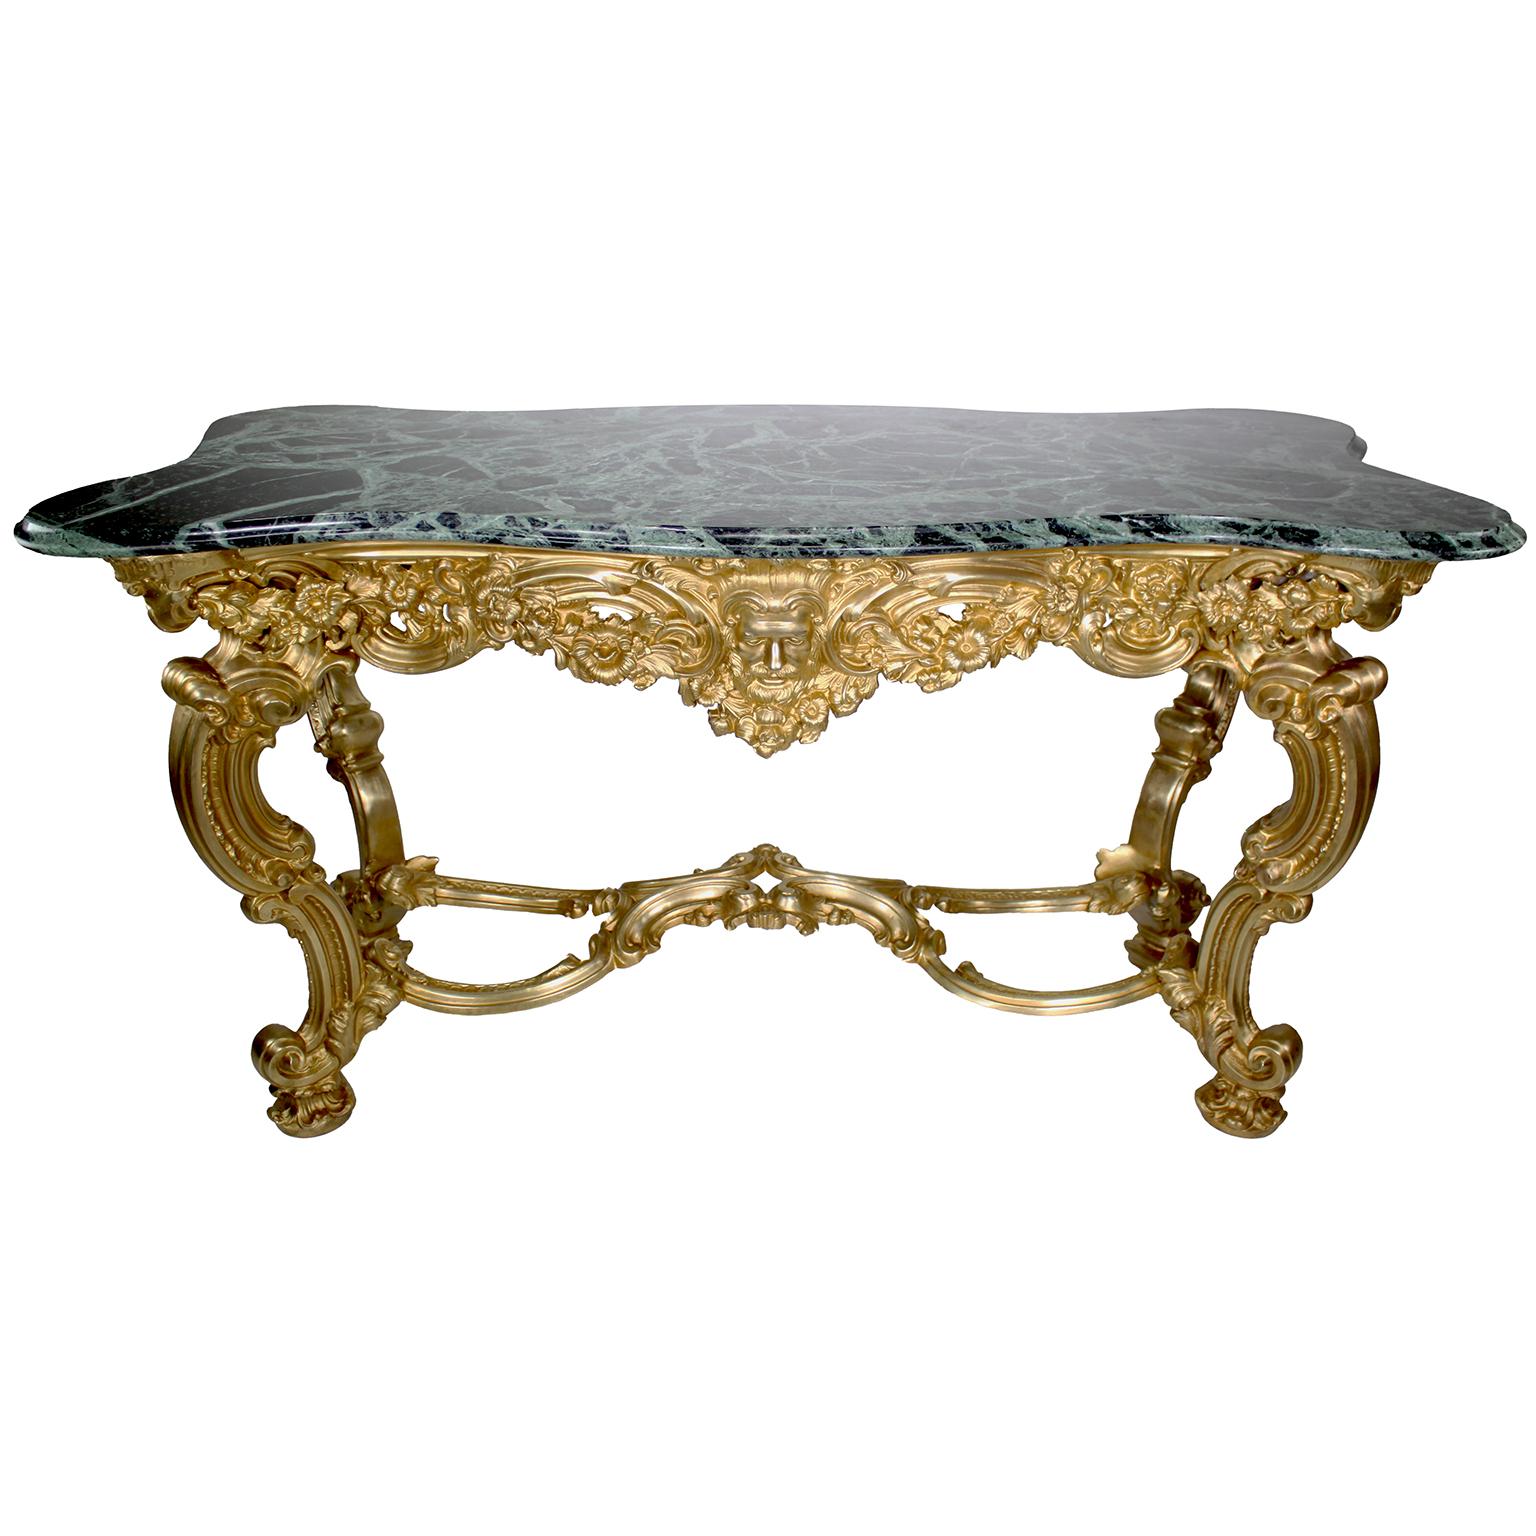 A Large and Impressive Pair of Italian Early 20th Century Rococo-Style Gilt-Bronze Center Tables or Wall Consoles with Marble Tops, attributed to Luigi Ciampaglia, renowned for his leadership at the esteemed Fonderia (Foundry) Chiurazzi di Napoli